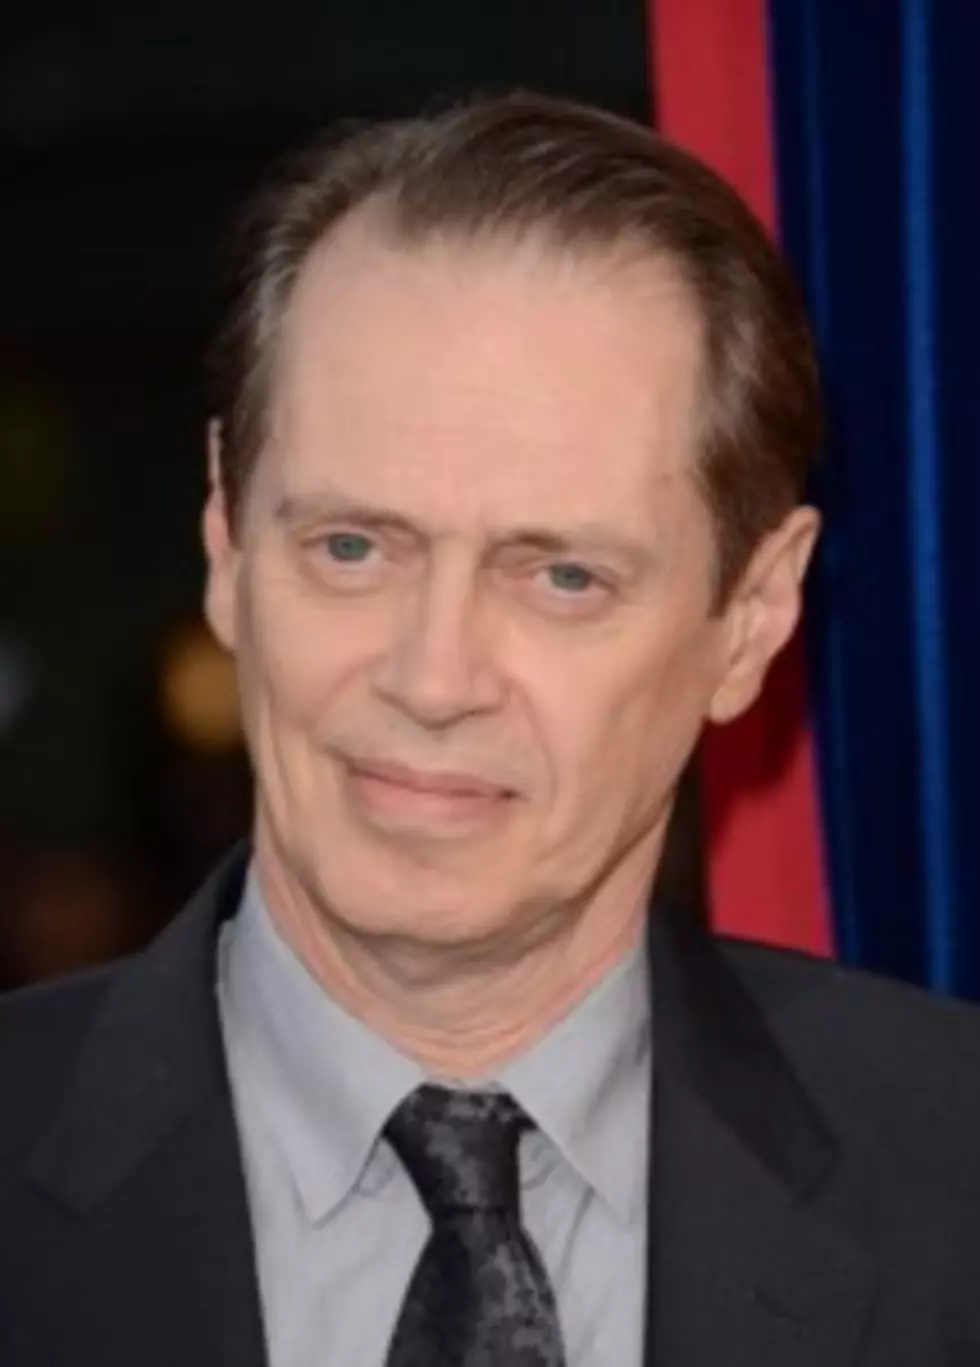 Steve Buscemi Worked 12-Hour Shifts Searching For Victims Of 9/11 &#8212; Fact Of The Day